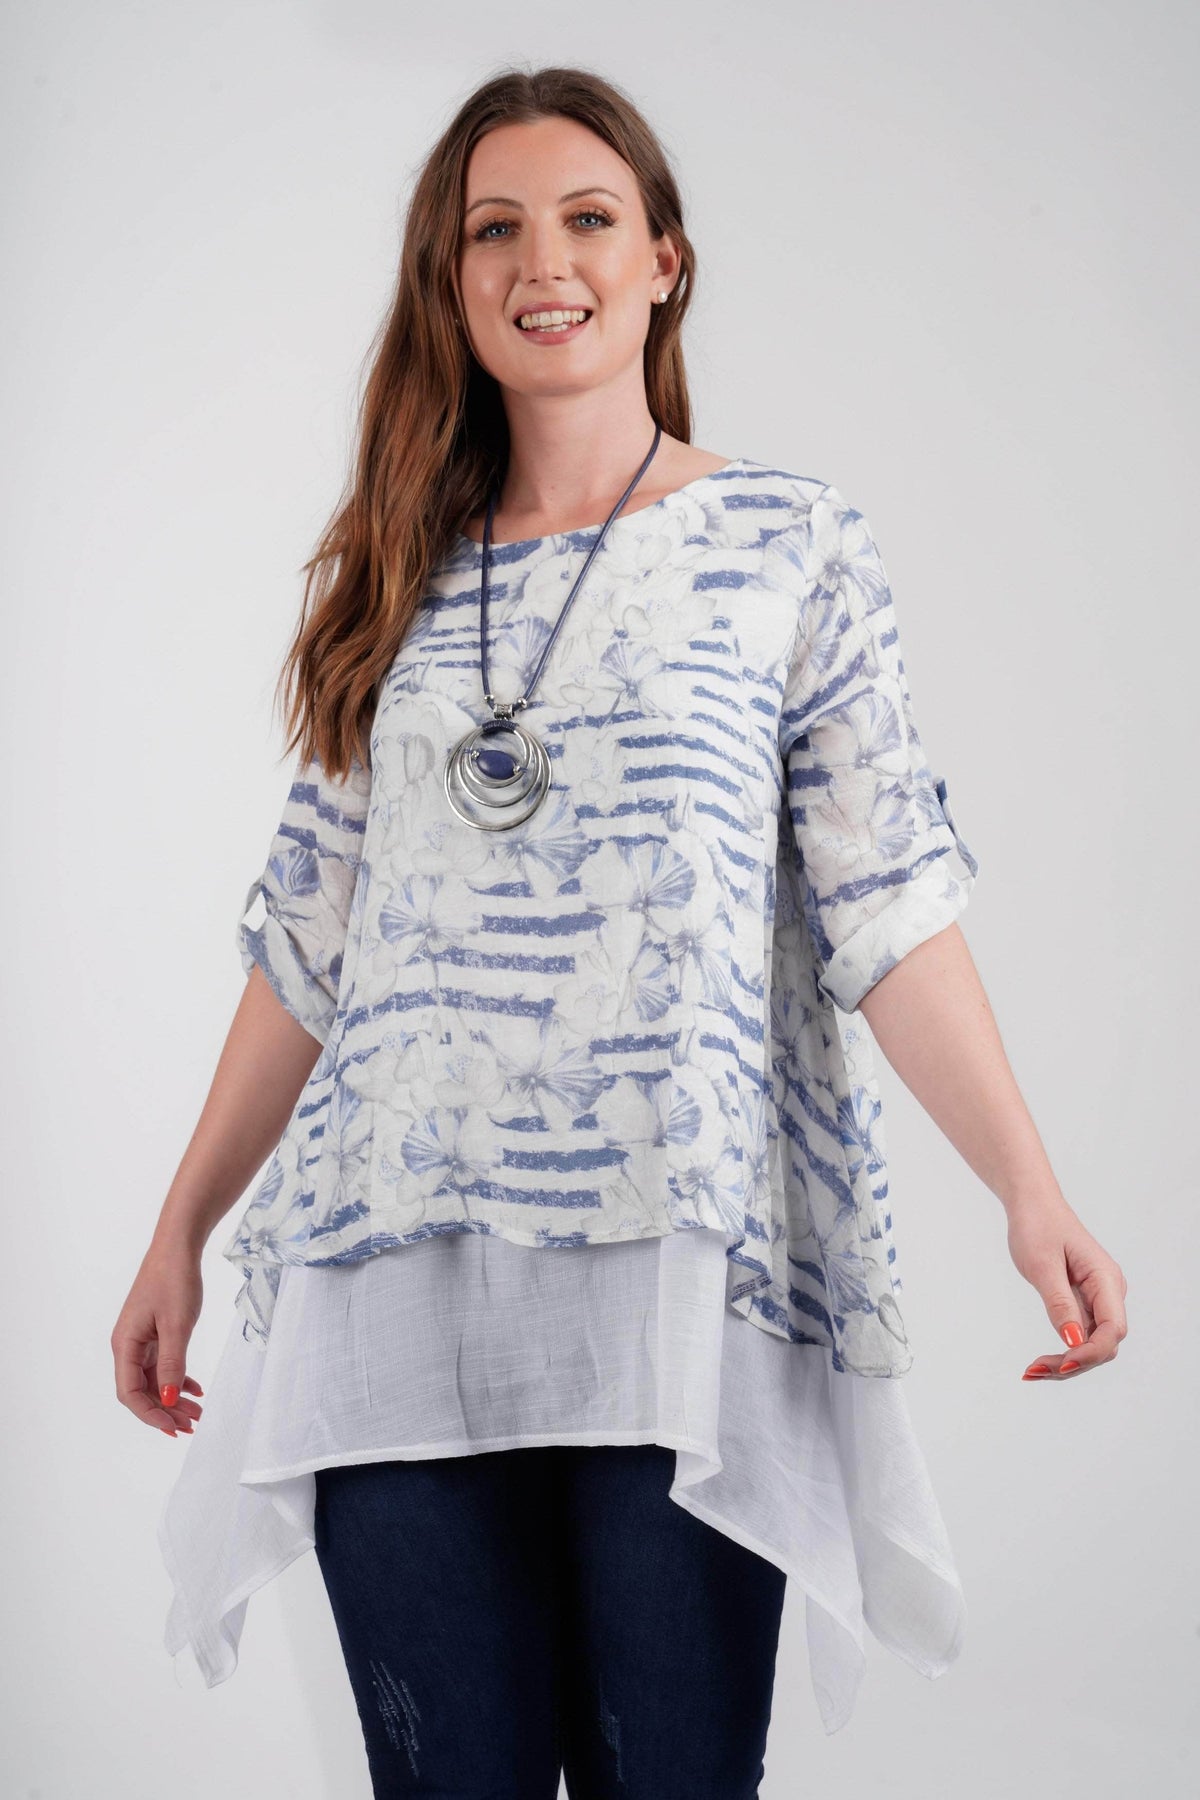 Saloos Top 12 / White Underlayer Floral Linen-Feel Layered Top with Necklace